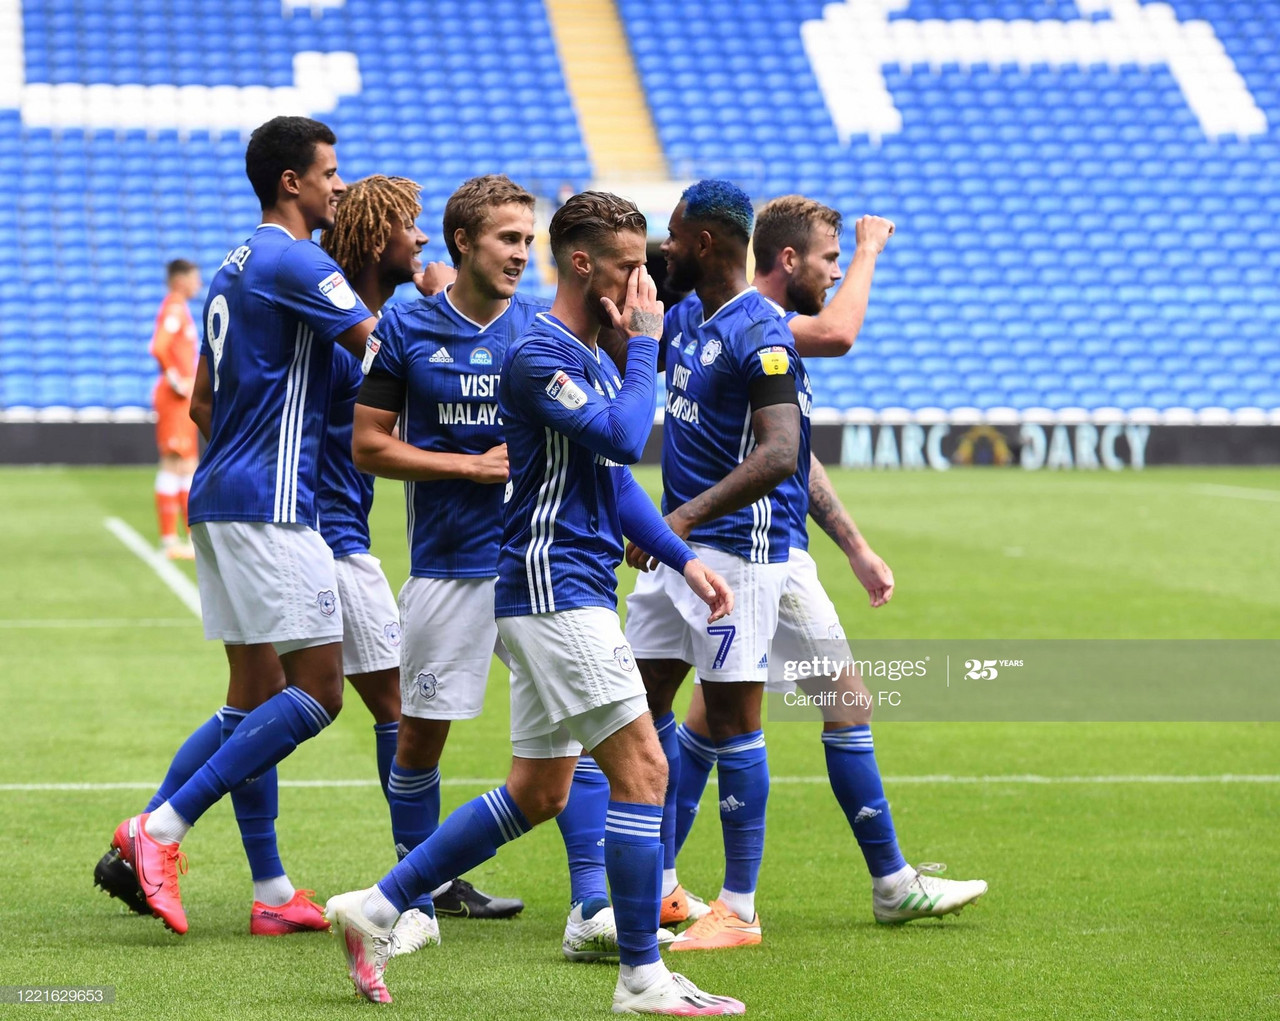 Cardiff City 2-0 Leeds United: Bluebirds close in on play-off places with win over Leeds